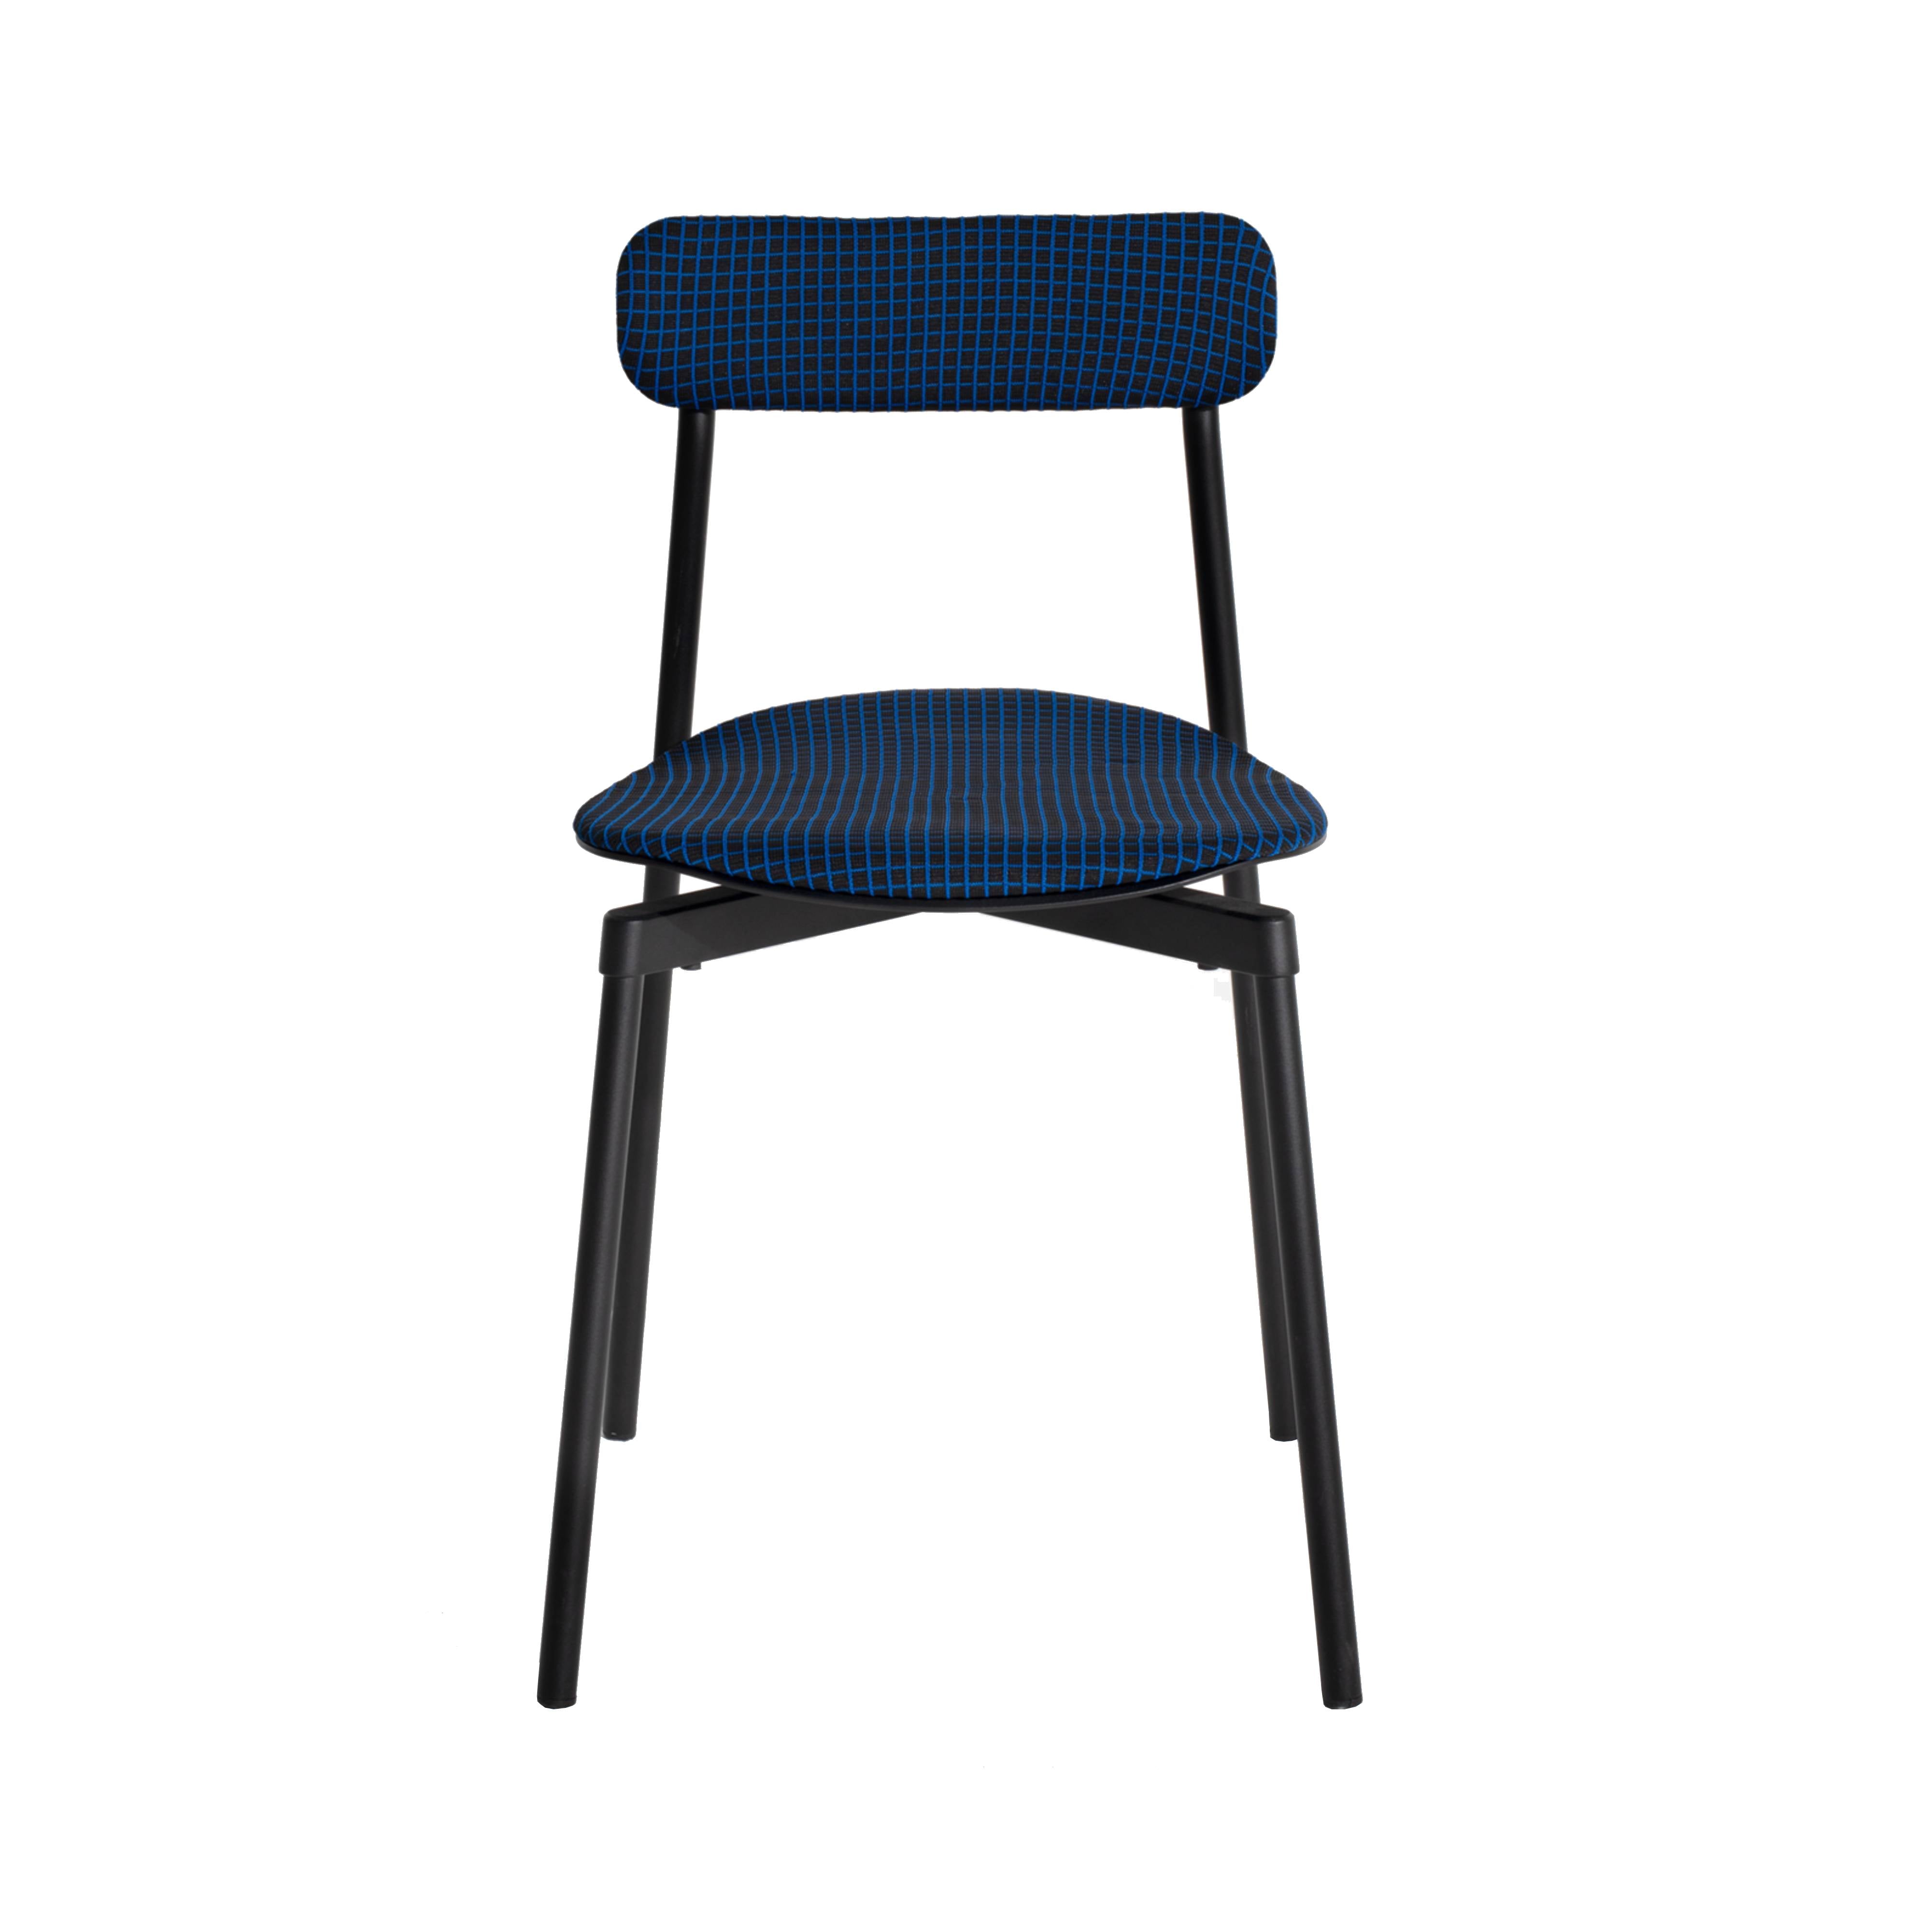 Fromme Soft Chair: Black + Blue